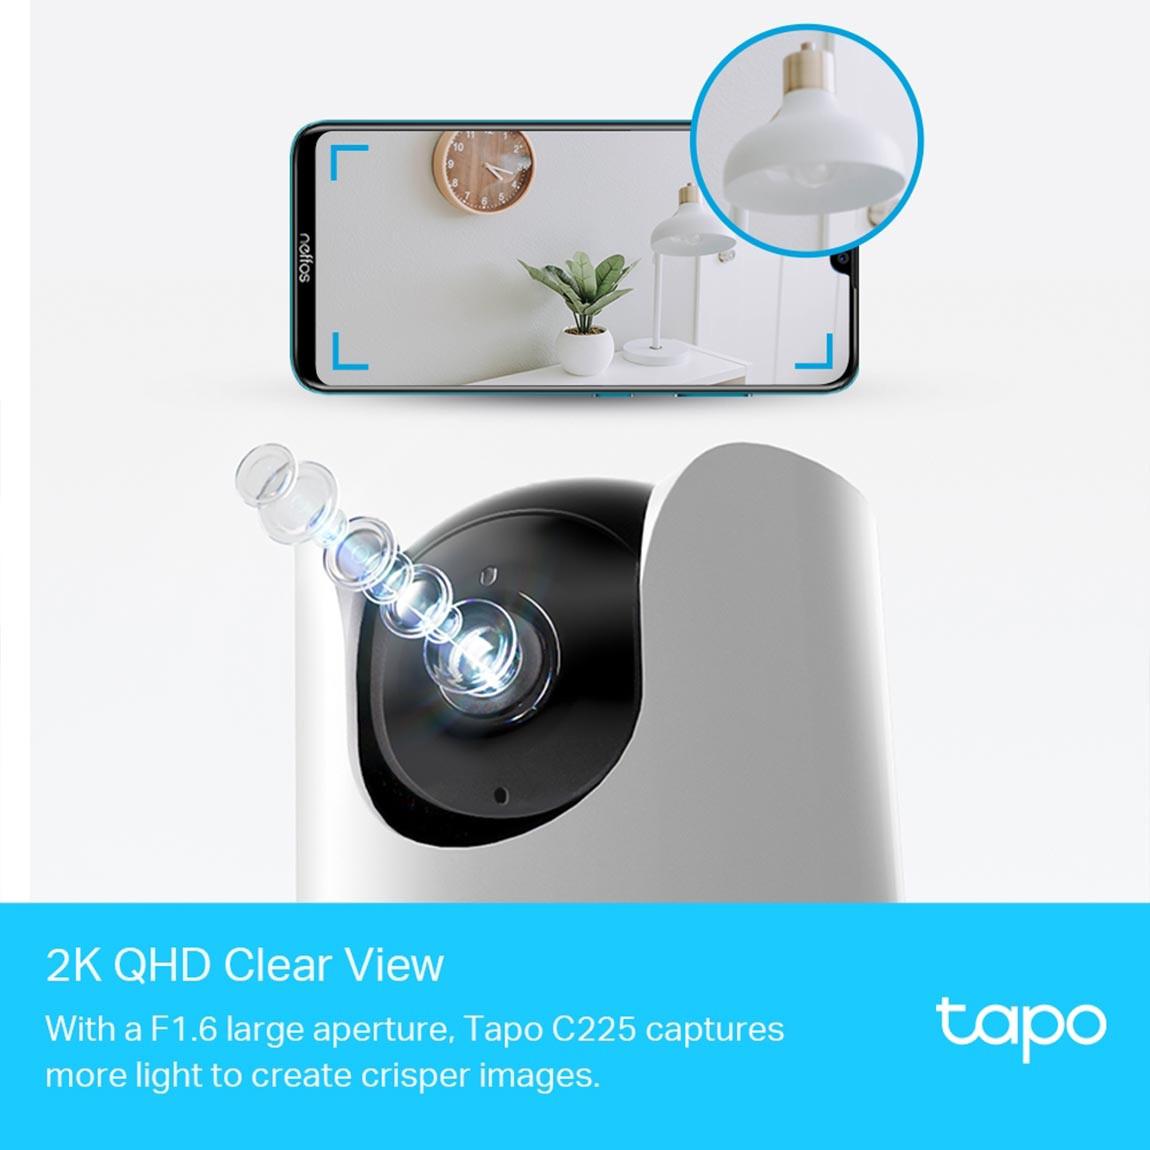 TP-Link Tapo C225 - Schwenk & Neige AI Home Security Wlan Kamera - Weiß_in_Aktion_4